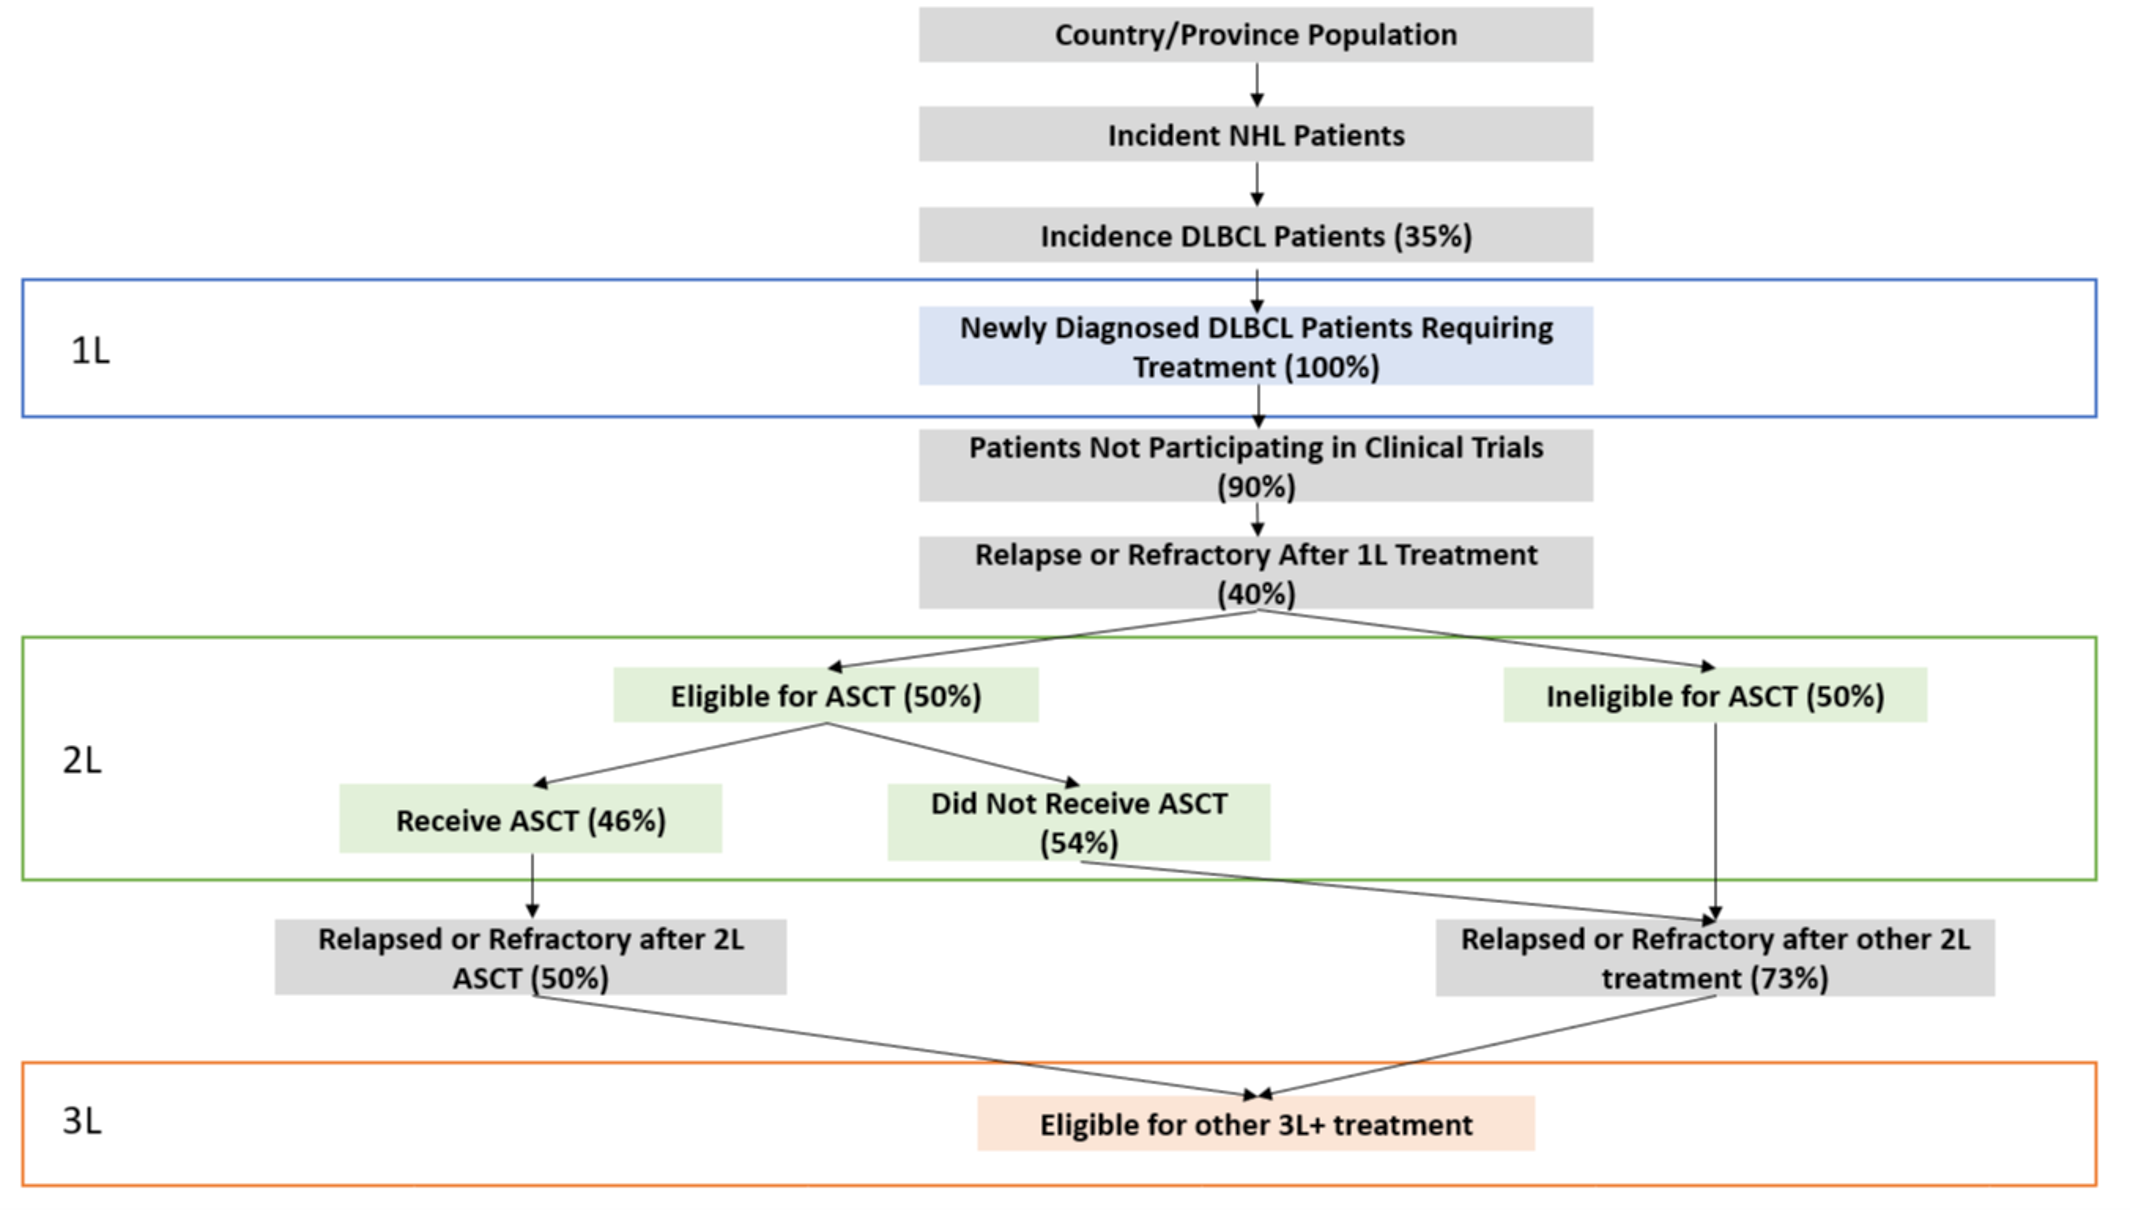 The eligible population is derived from the number of people in Canada, the incidence of NHL, the incidence of DLBCL, newly diagnosed DLBCL who require treatment (i.e., first line treatment), patients not participating in clinical trials, patients who relapse on or are refractory to first line treatment, patients who are eligible for and do receive ASCT, patients who do not receive ASCT, patients who relapse or are refractory after second line ASCT (or other second line treatment), finally leading to the proportion of patients eligible for third line (or later) treatments.